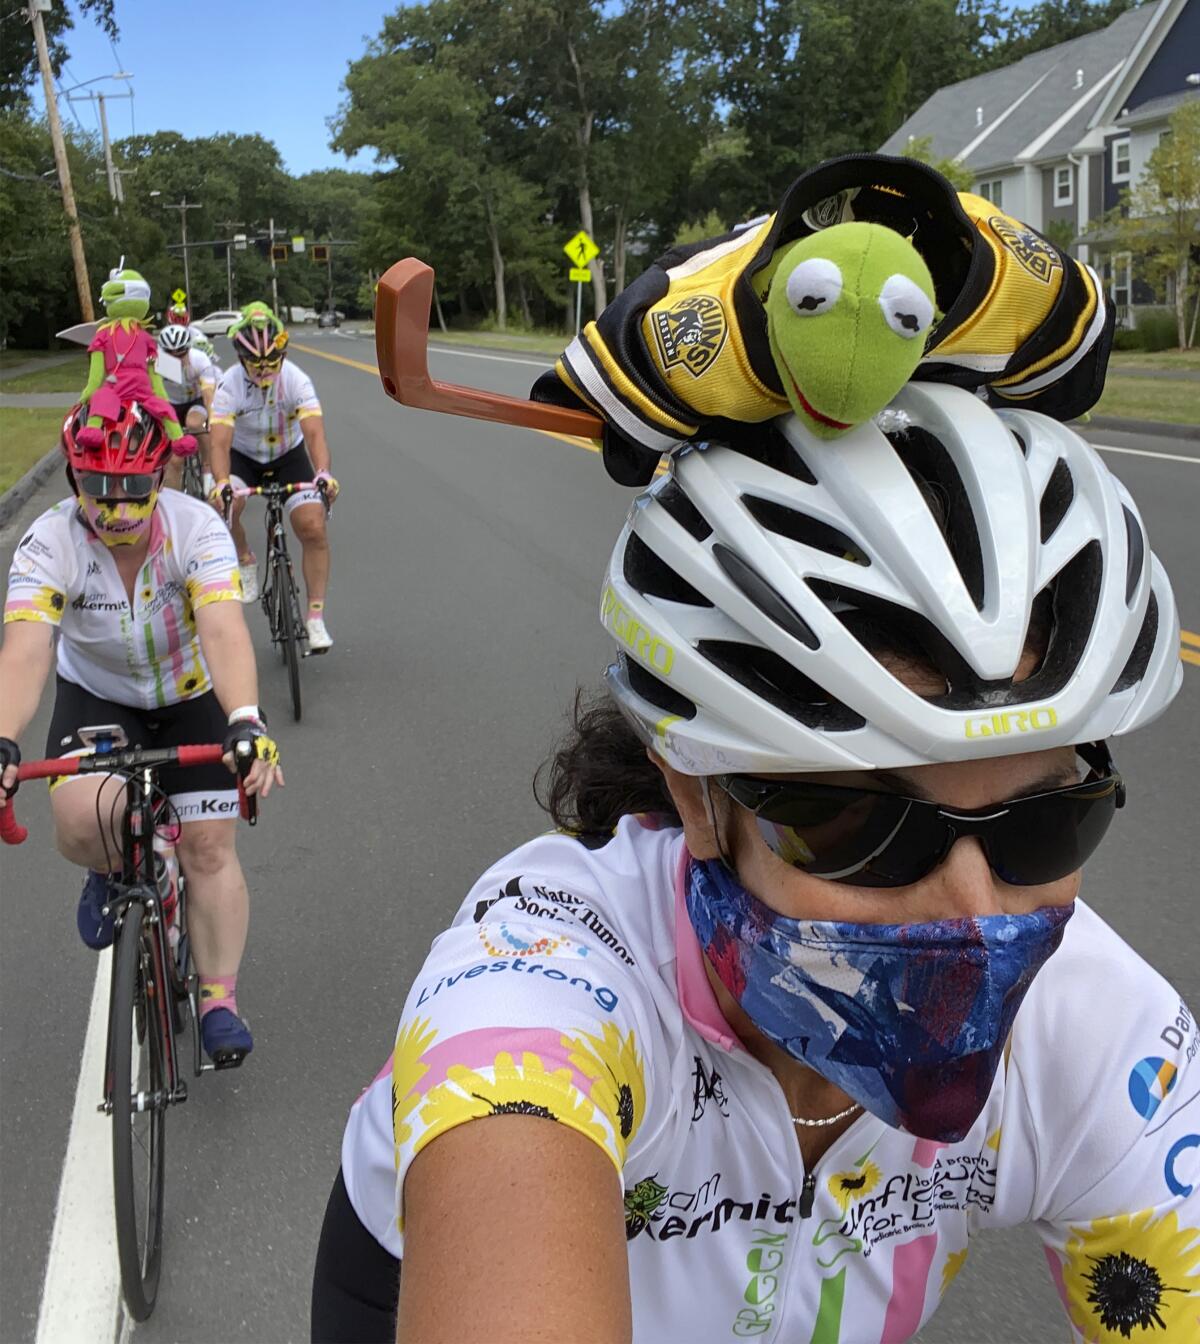 In this July 31, 2020 photo, Pan-Mass Challenge bike rider Celia Donatio, right, cycles with her teammates through Needham, Mass. "Team Kermit" raised close to $554,000 for Dana Farber Cancer Research. PMC founder Billy Starr knew he wouldn't be able to get 10,000 people together this summer for the annual cross-state bike ride that has raised more than $700 million for cancer research. But he also knew he couldn't take the year off. While other events in the $1.4 billion participatory fundraising field shut down during the coronavirus outbreak, the PMC delivered $50 million for the Dana-Farber Cancer Institute. (Photo by Celia Donatio via AP)